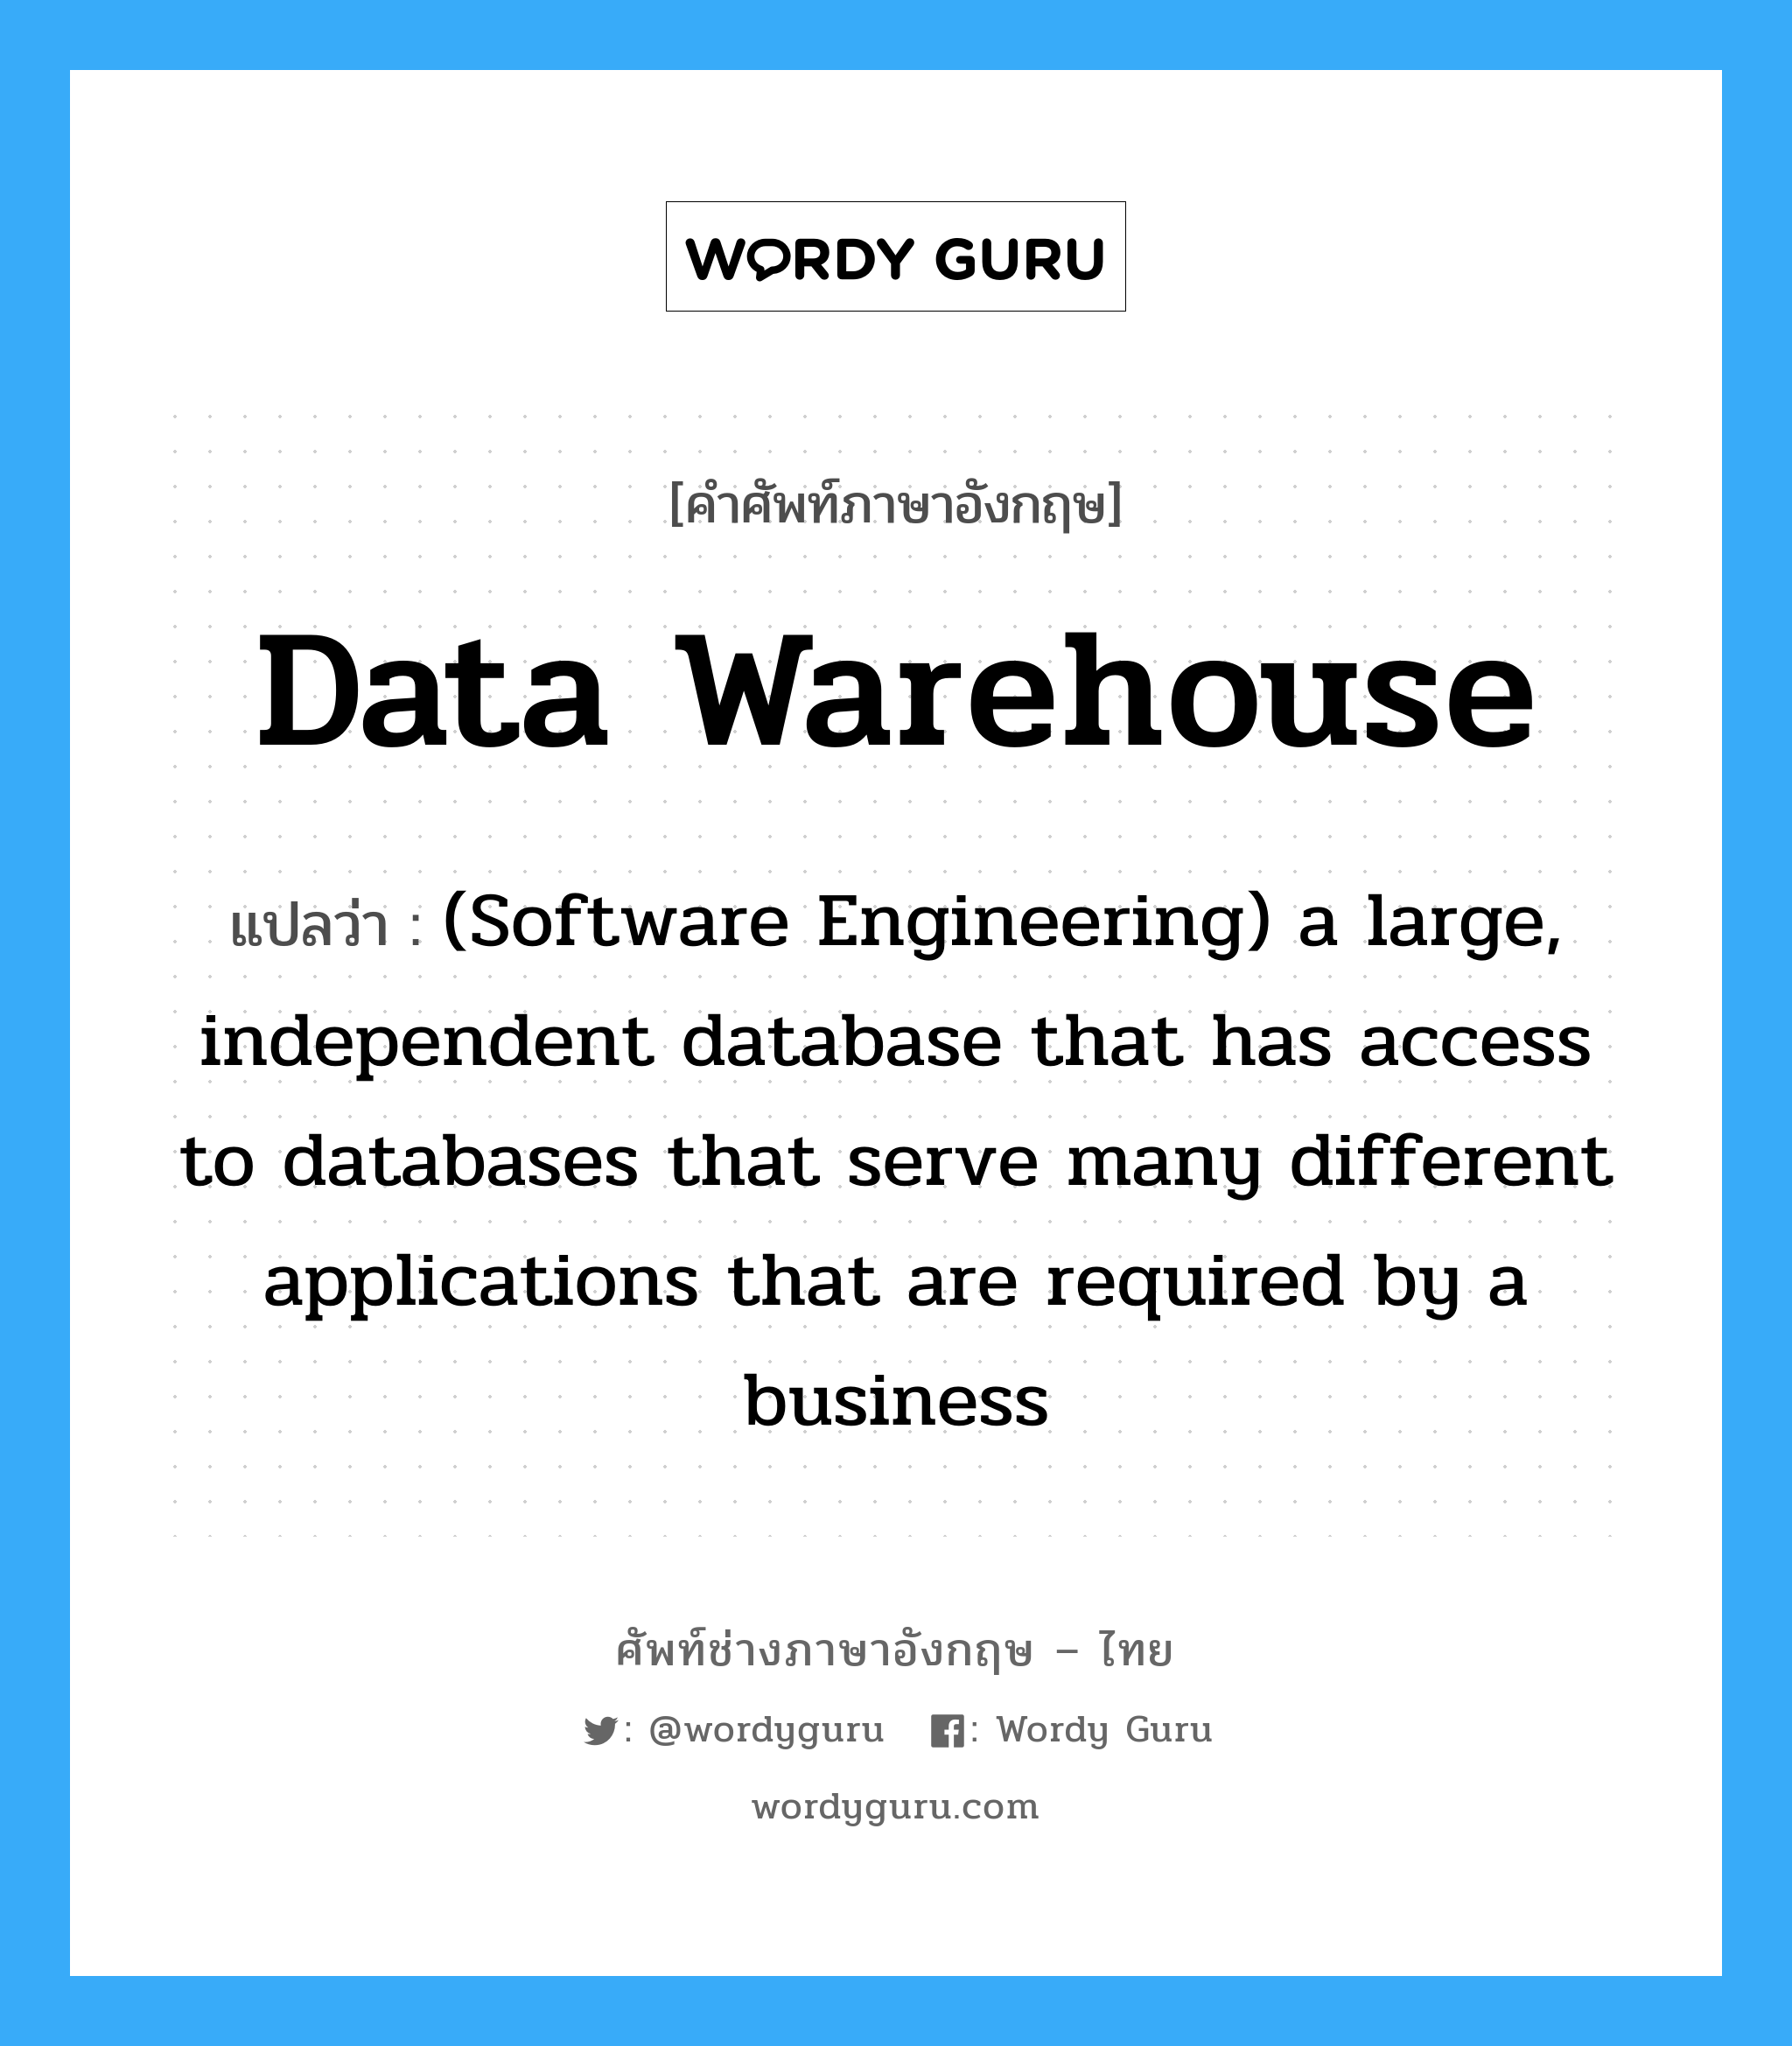 Data warehouse แปลว่า?, คำศัพท์ช่างภาษาอังกฤษ - ไทย Data warehouse คำศัพท์ภาษาอังกฤษ Data warehouse แปลว่า (Software Engineering) a large, independent database that has access to databases that serve many different applications that are required by a business